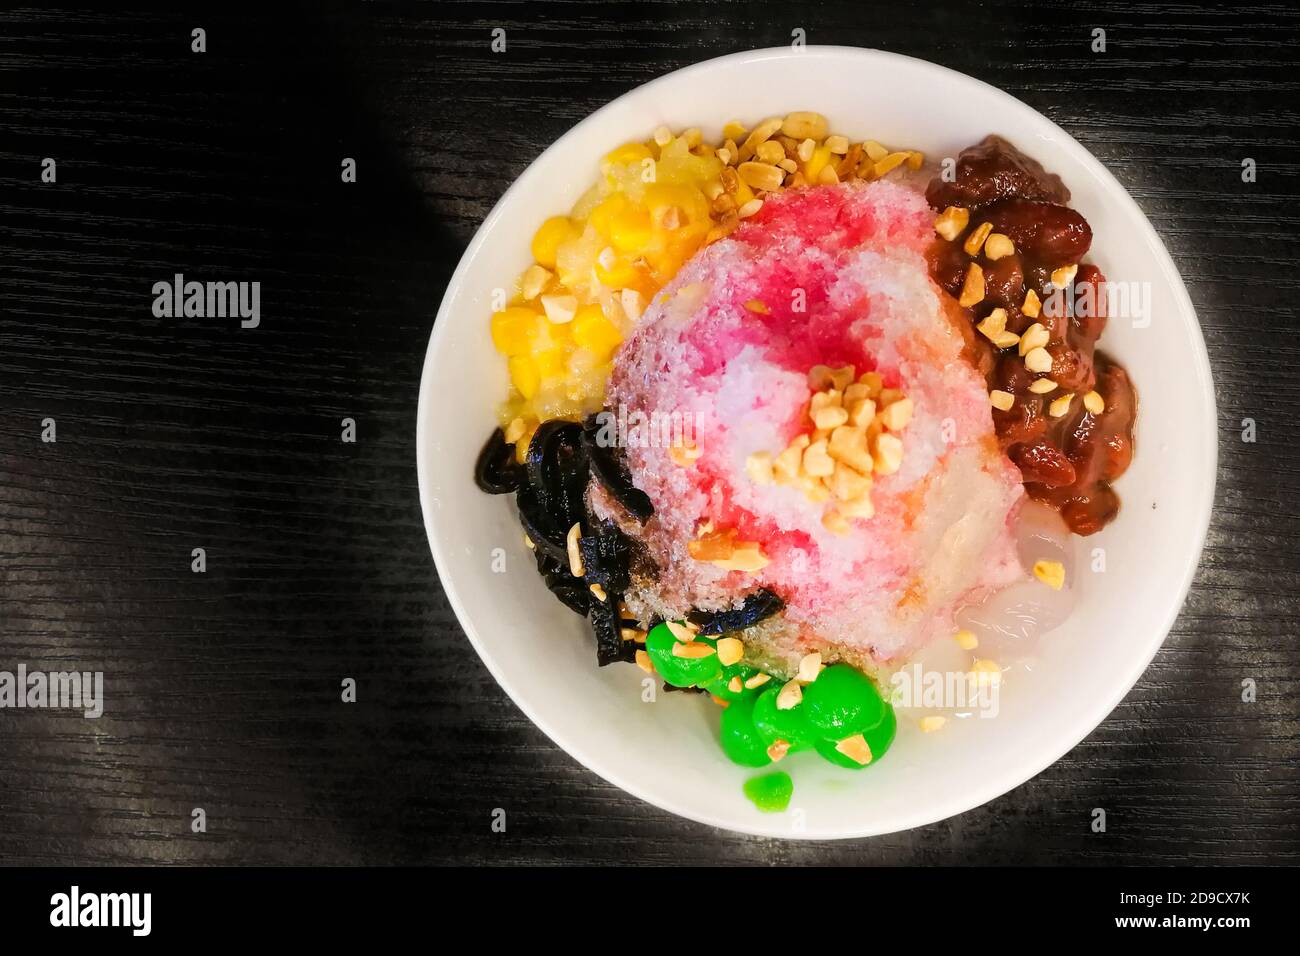 Ice kacang, shaved ice desert with milk , syrup, beans, corn Stock Photo